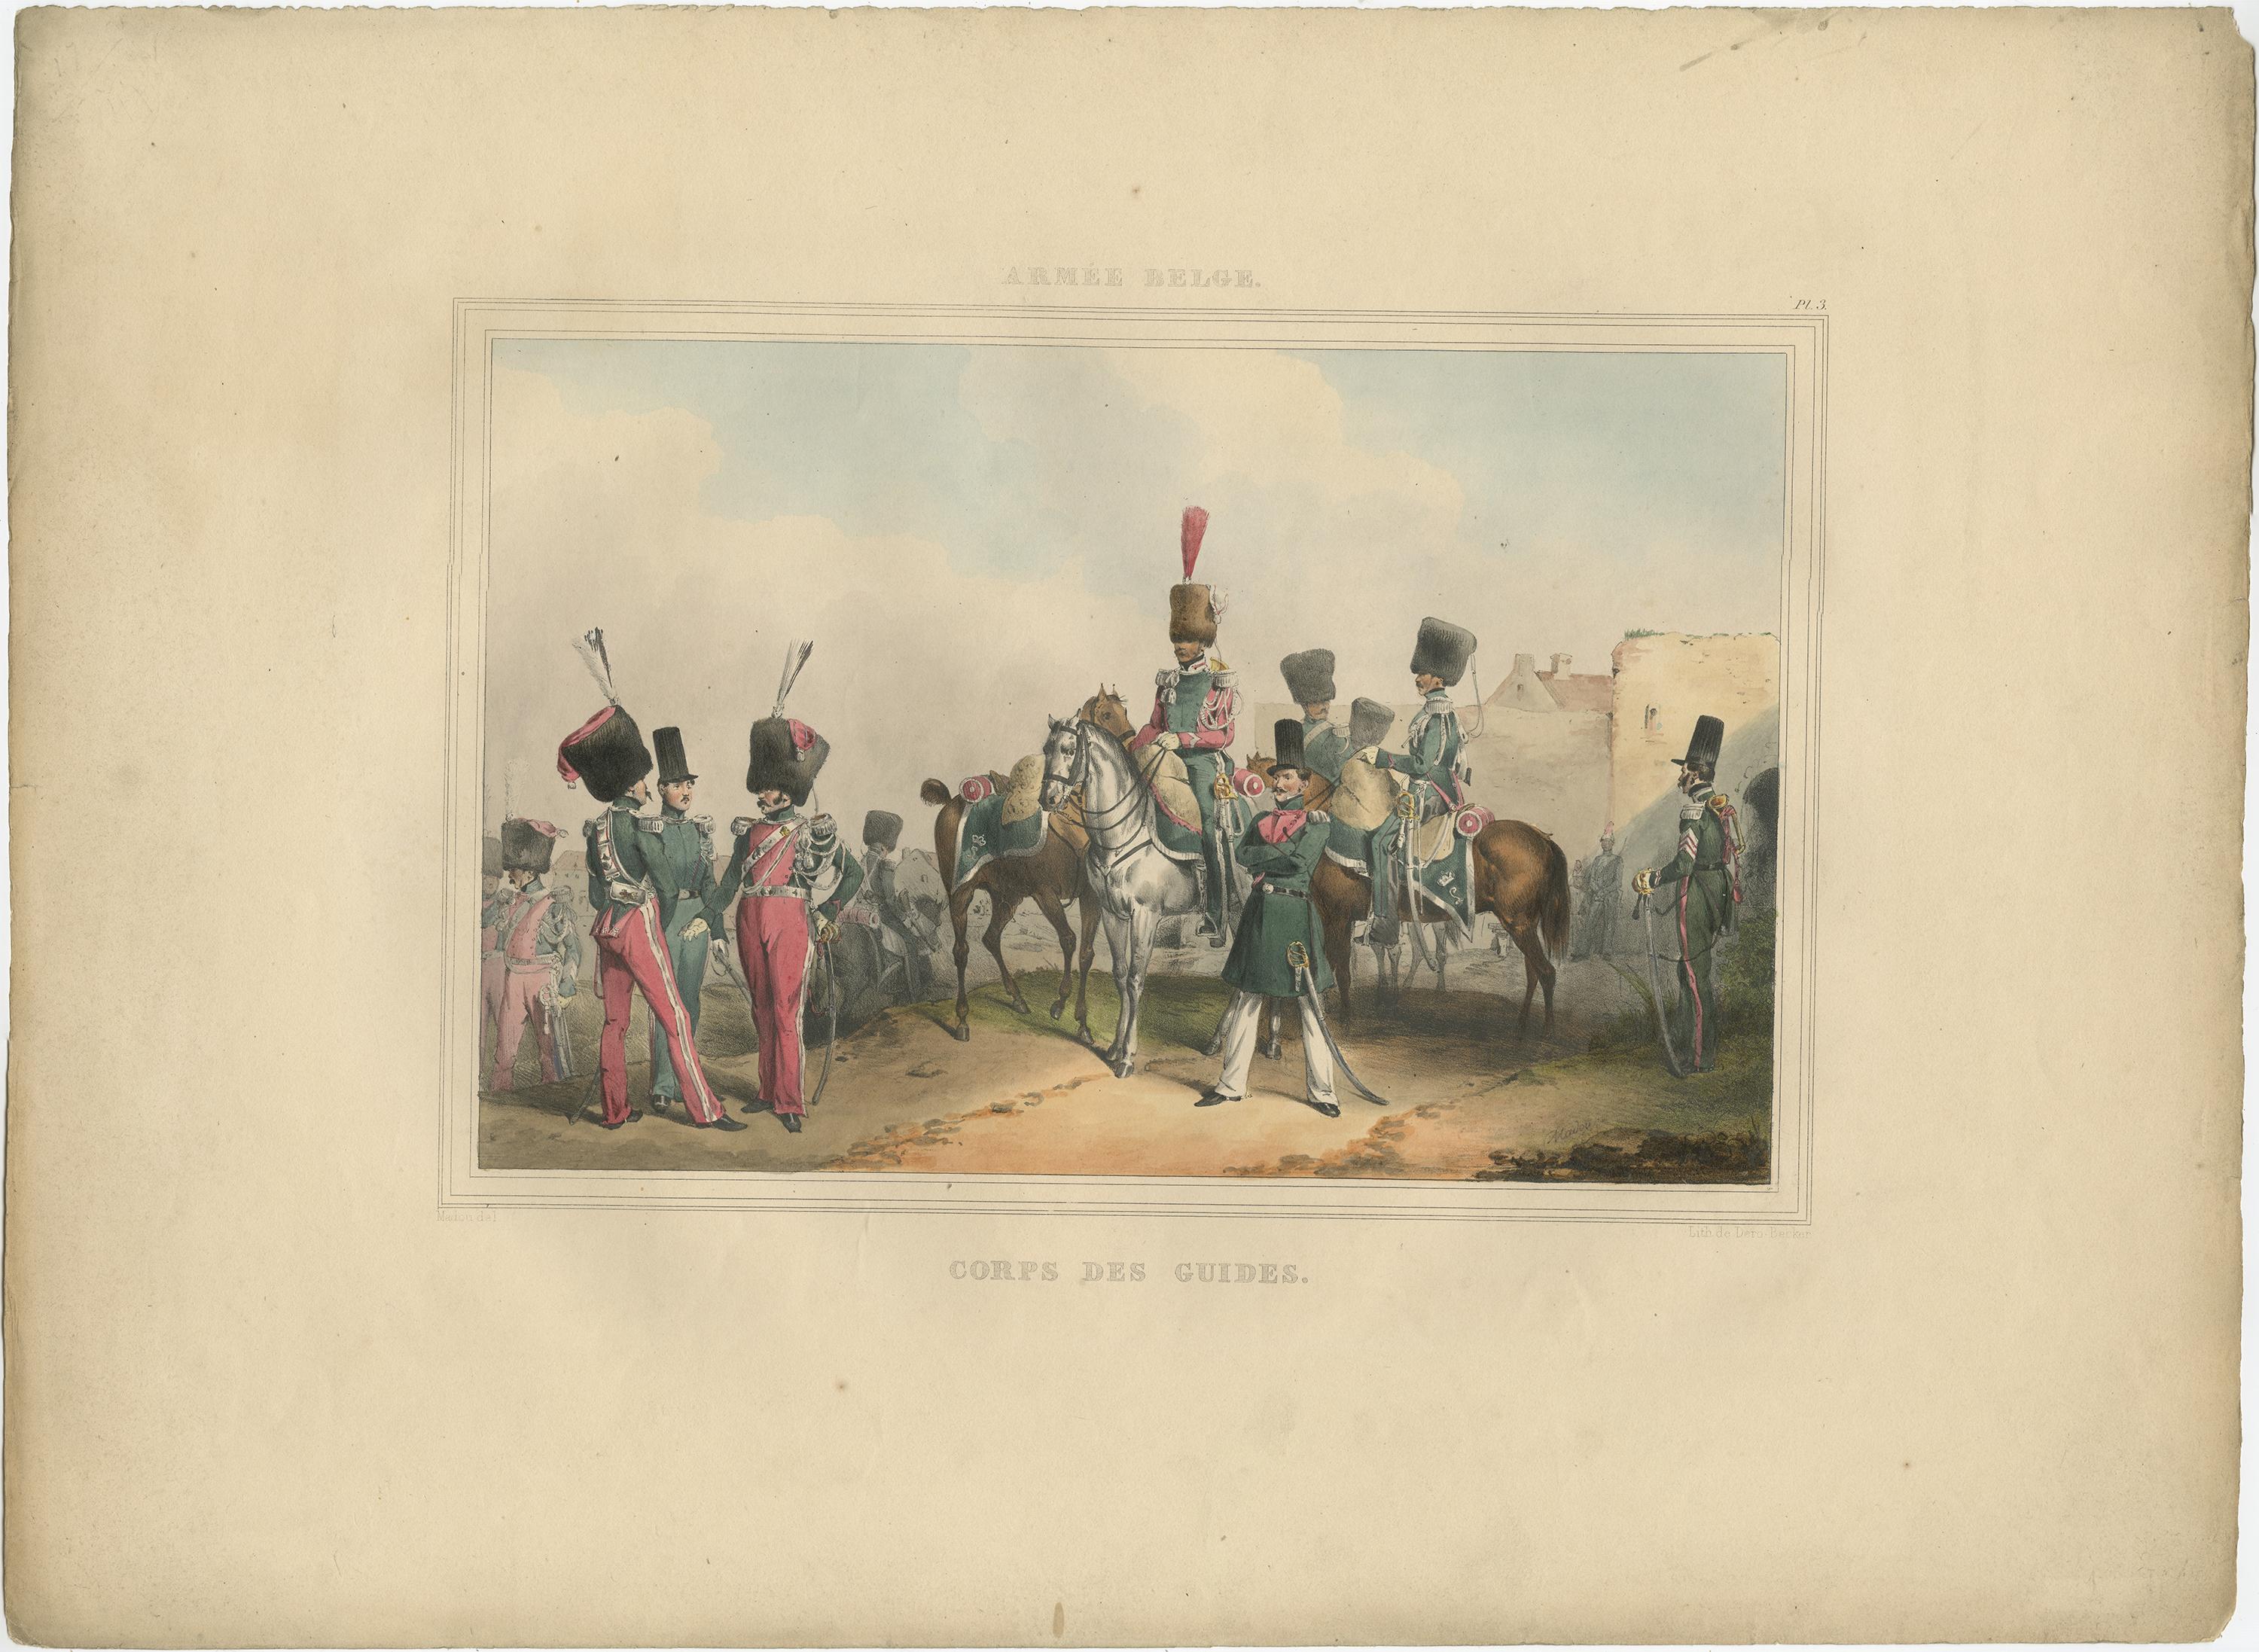 One nicely hand coloured print of an original serie of 23 plates, showing officers and soldiers resting near a village. published in 1833. Rare.

From a serie of beautiful lithographed plates with Belgian military costumes after Madou and printed